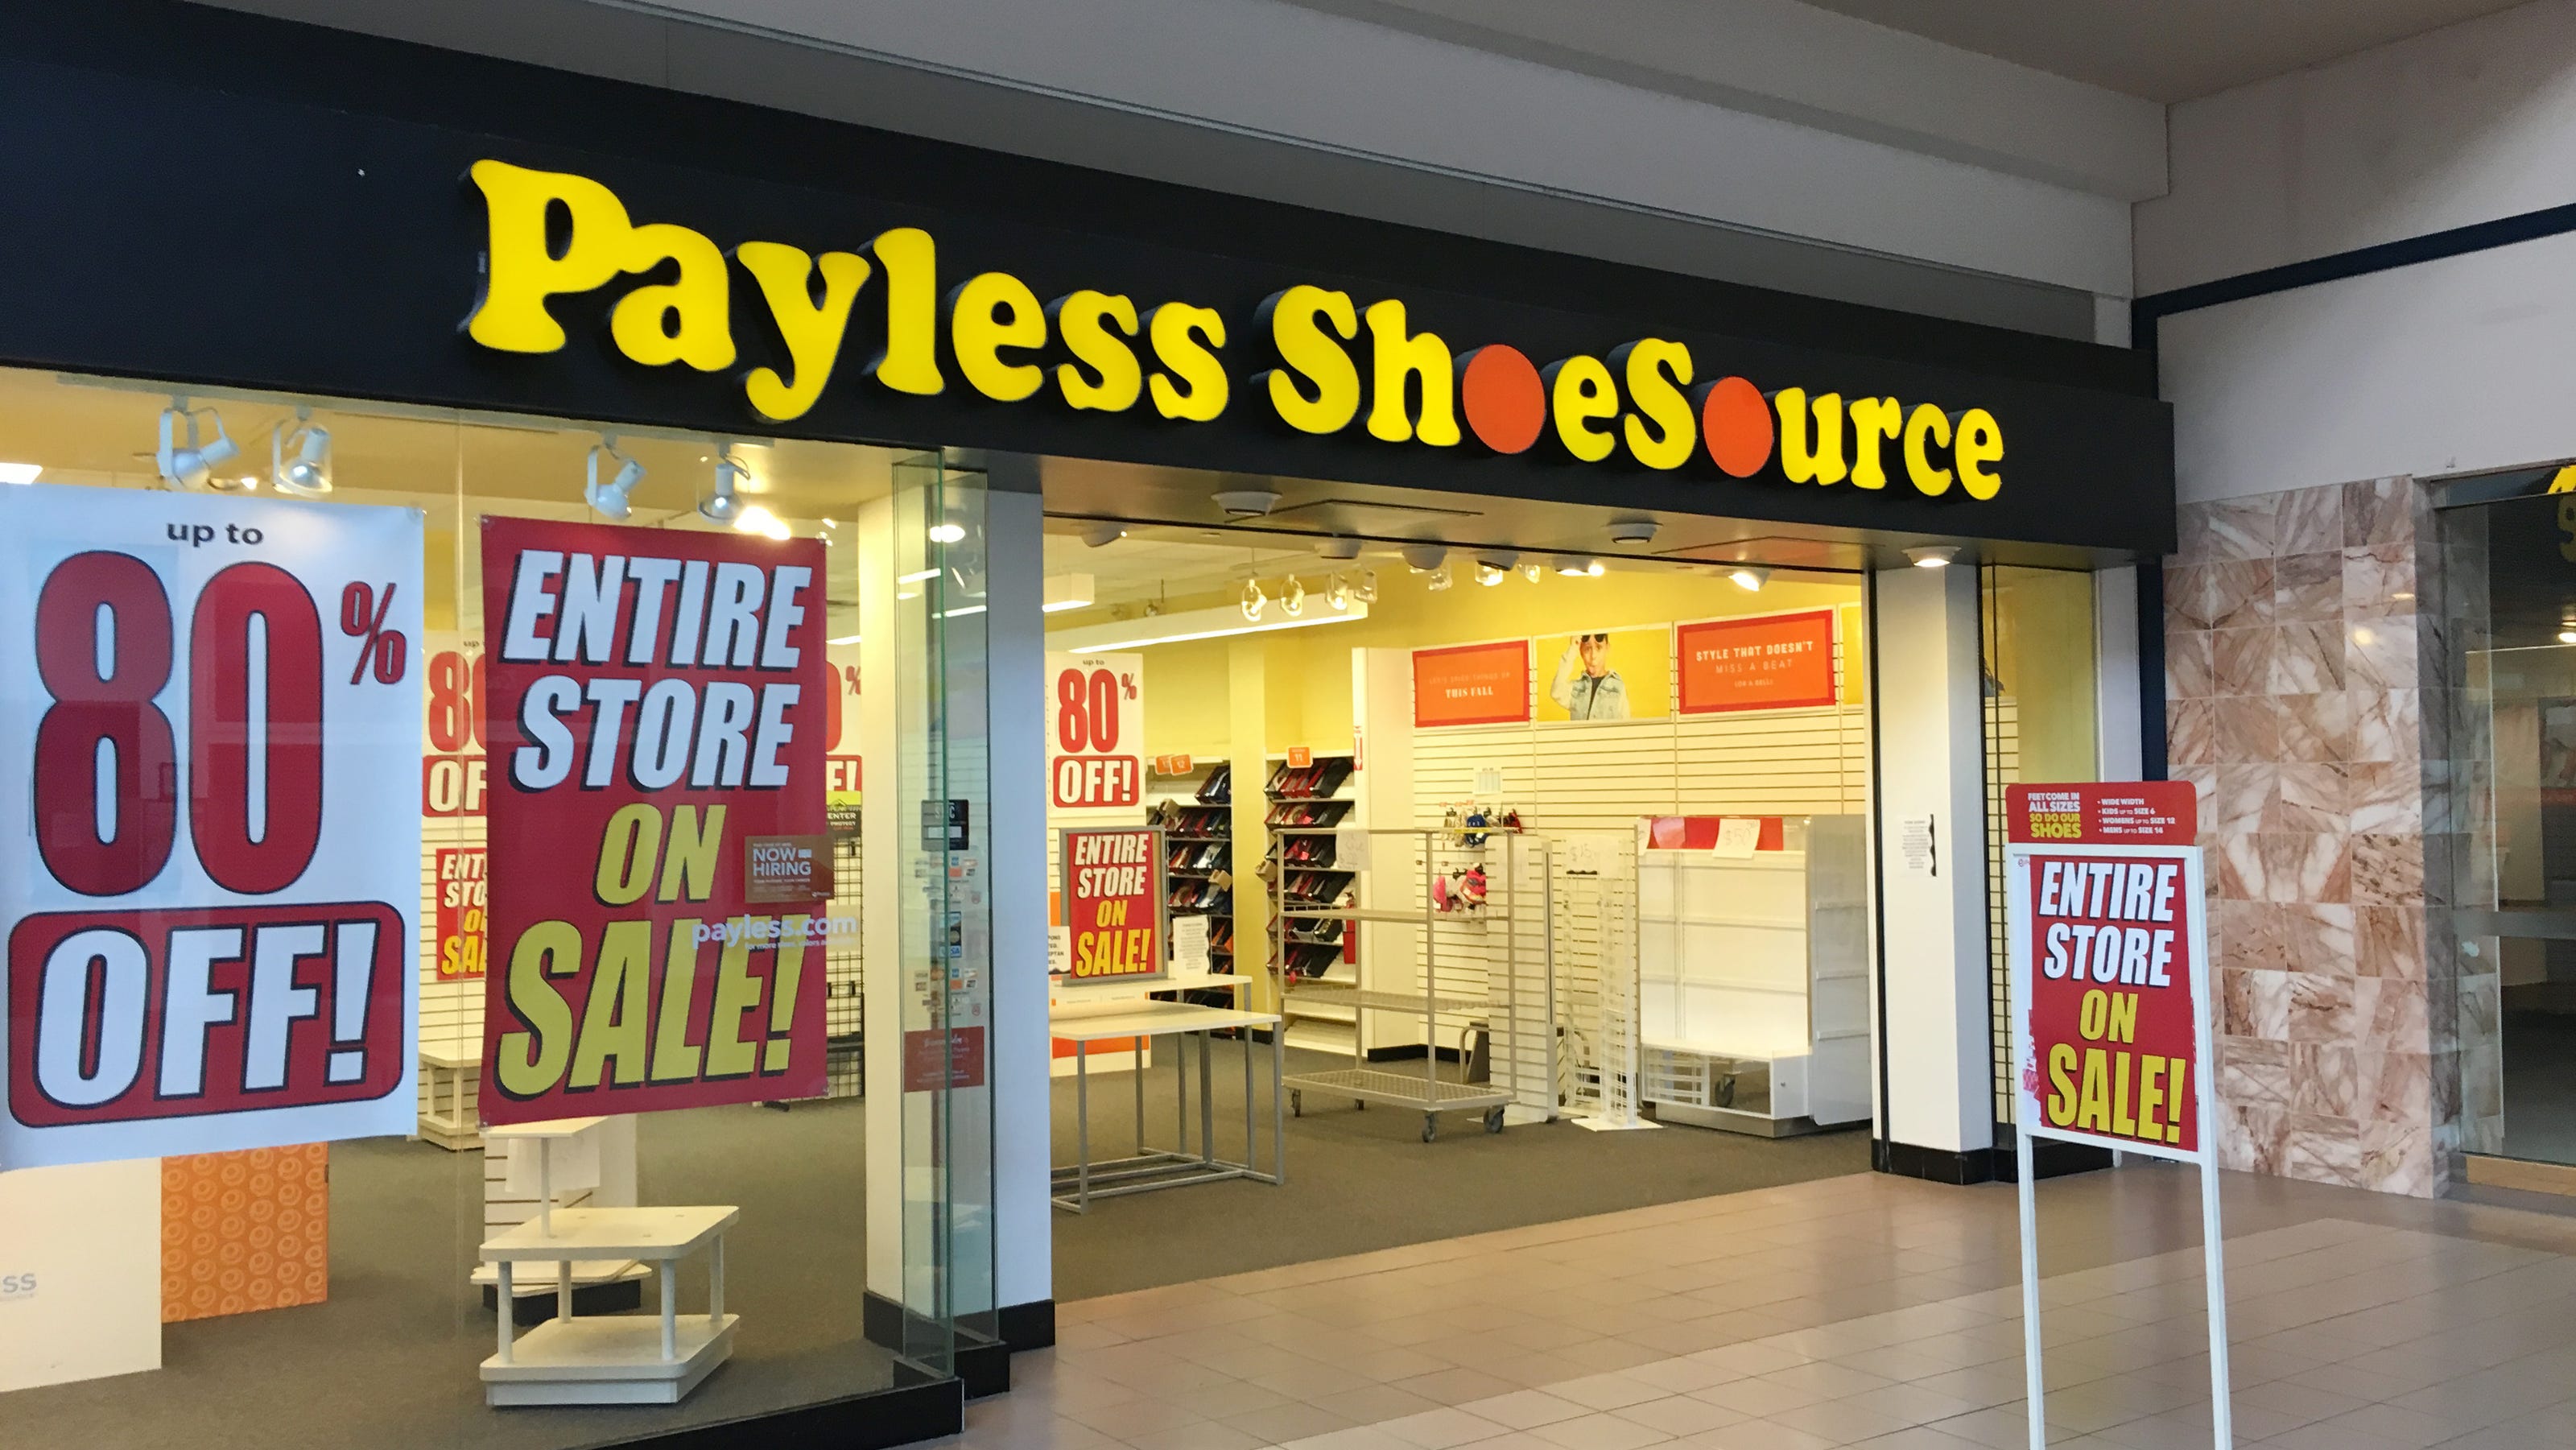 Payless ShoeSource closing all 2,100 U.S. stores, starting liquidation sales Sunday